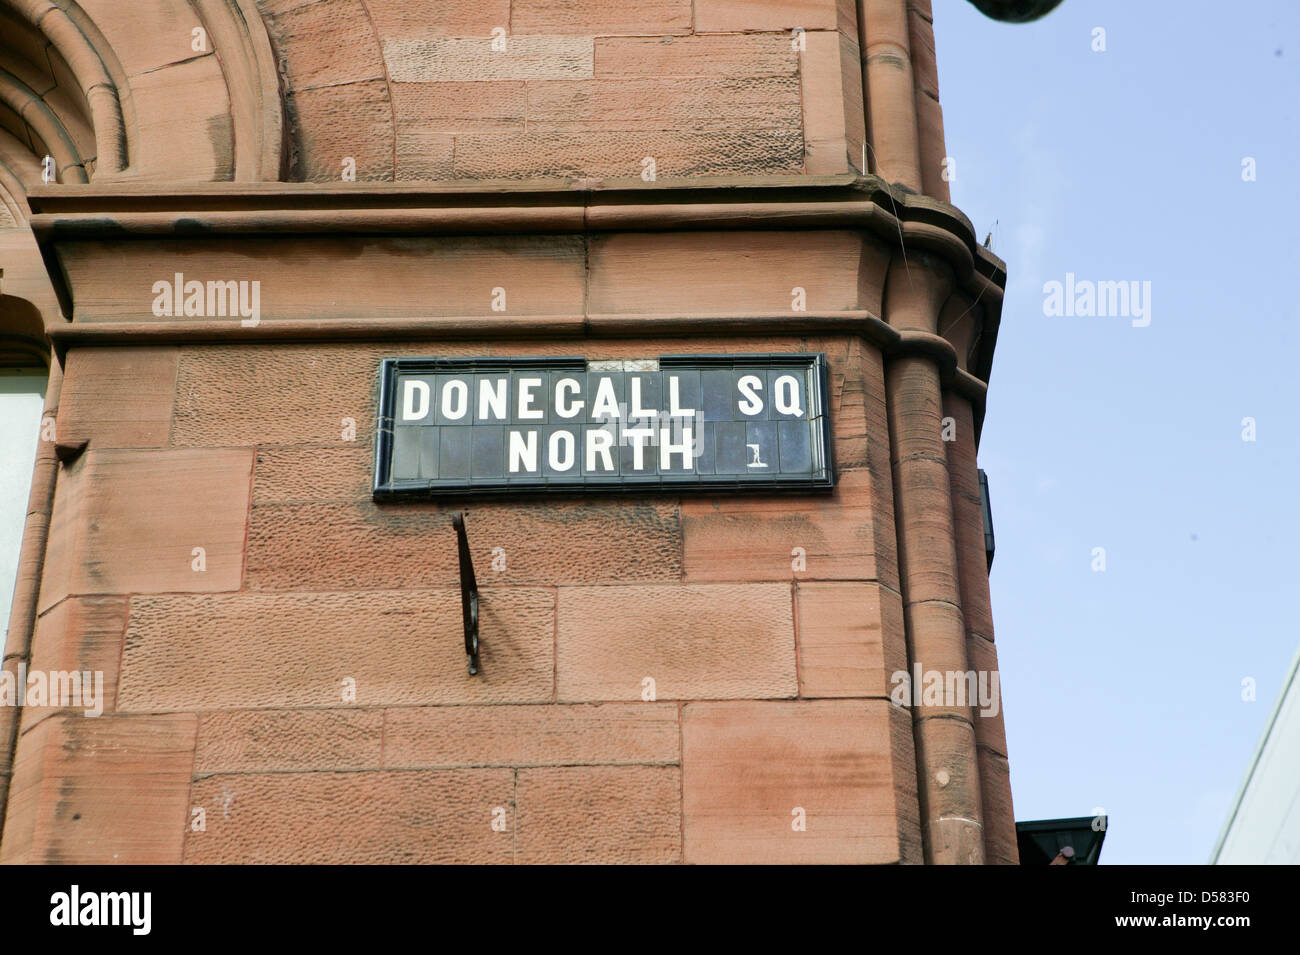 Donegall Square North Sign,White lettering on black background Stock Photo